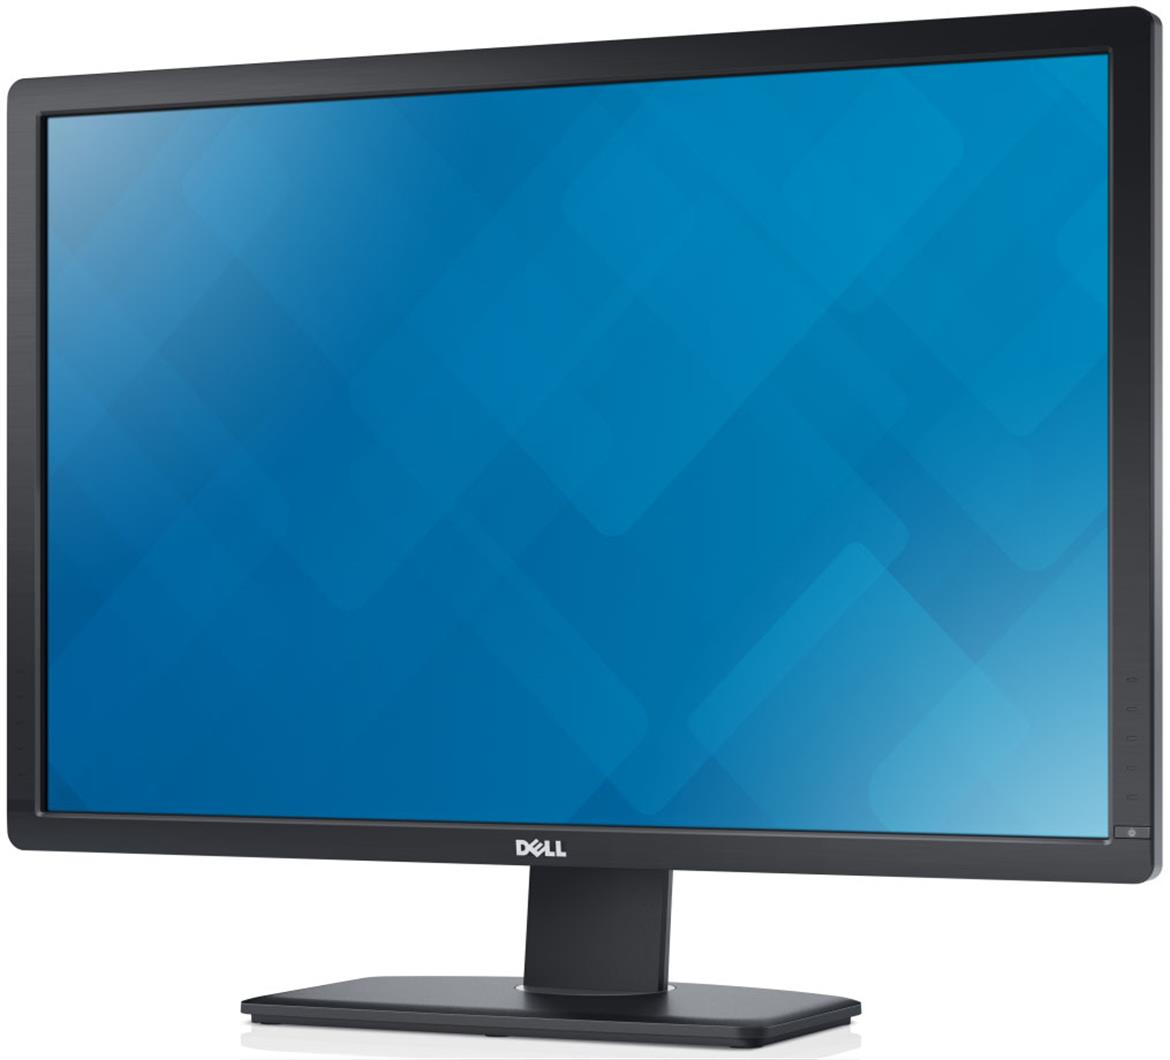 Dell Updates UltraSharp Display Line-up with PremierColor and Ultra-Wide Model